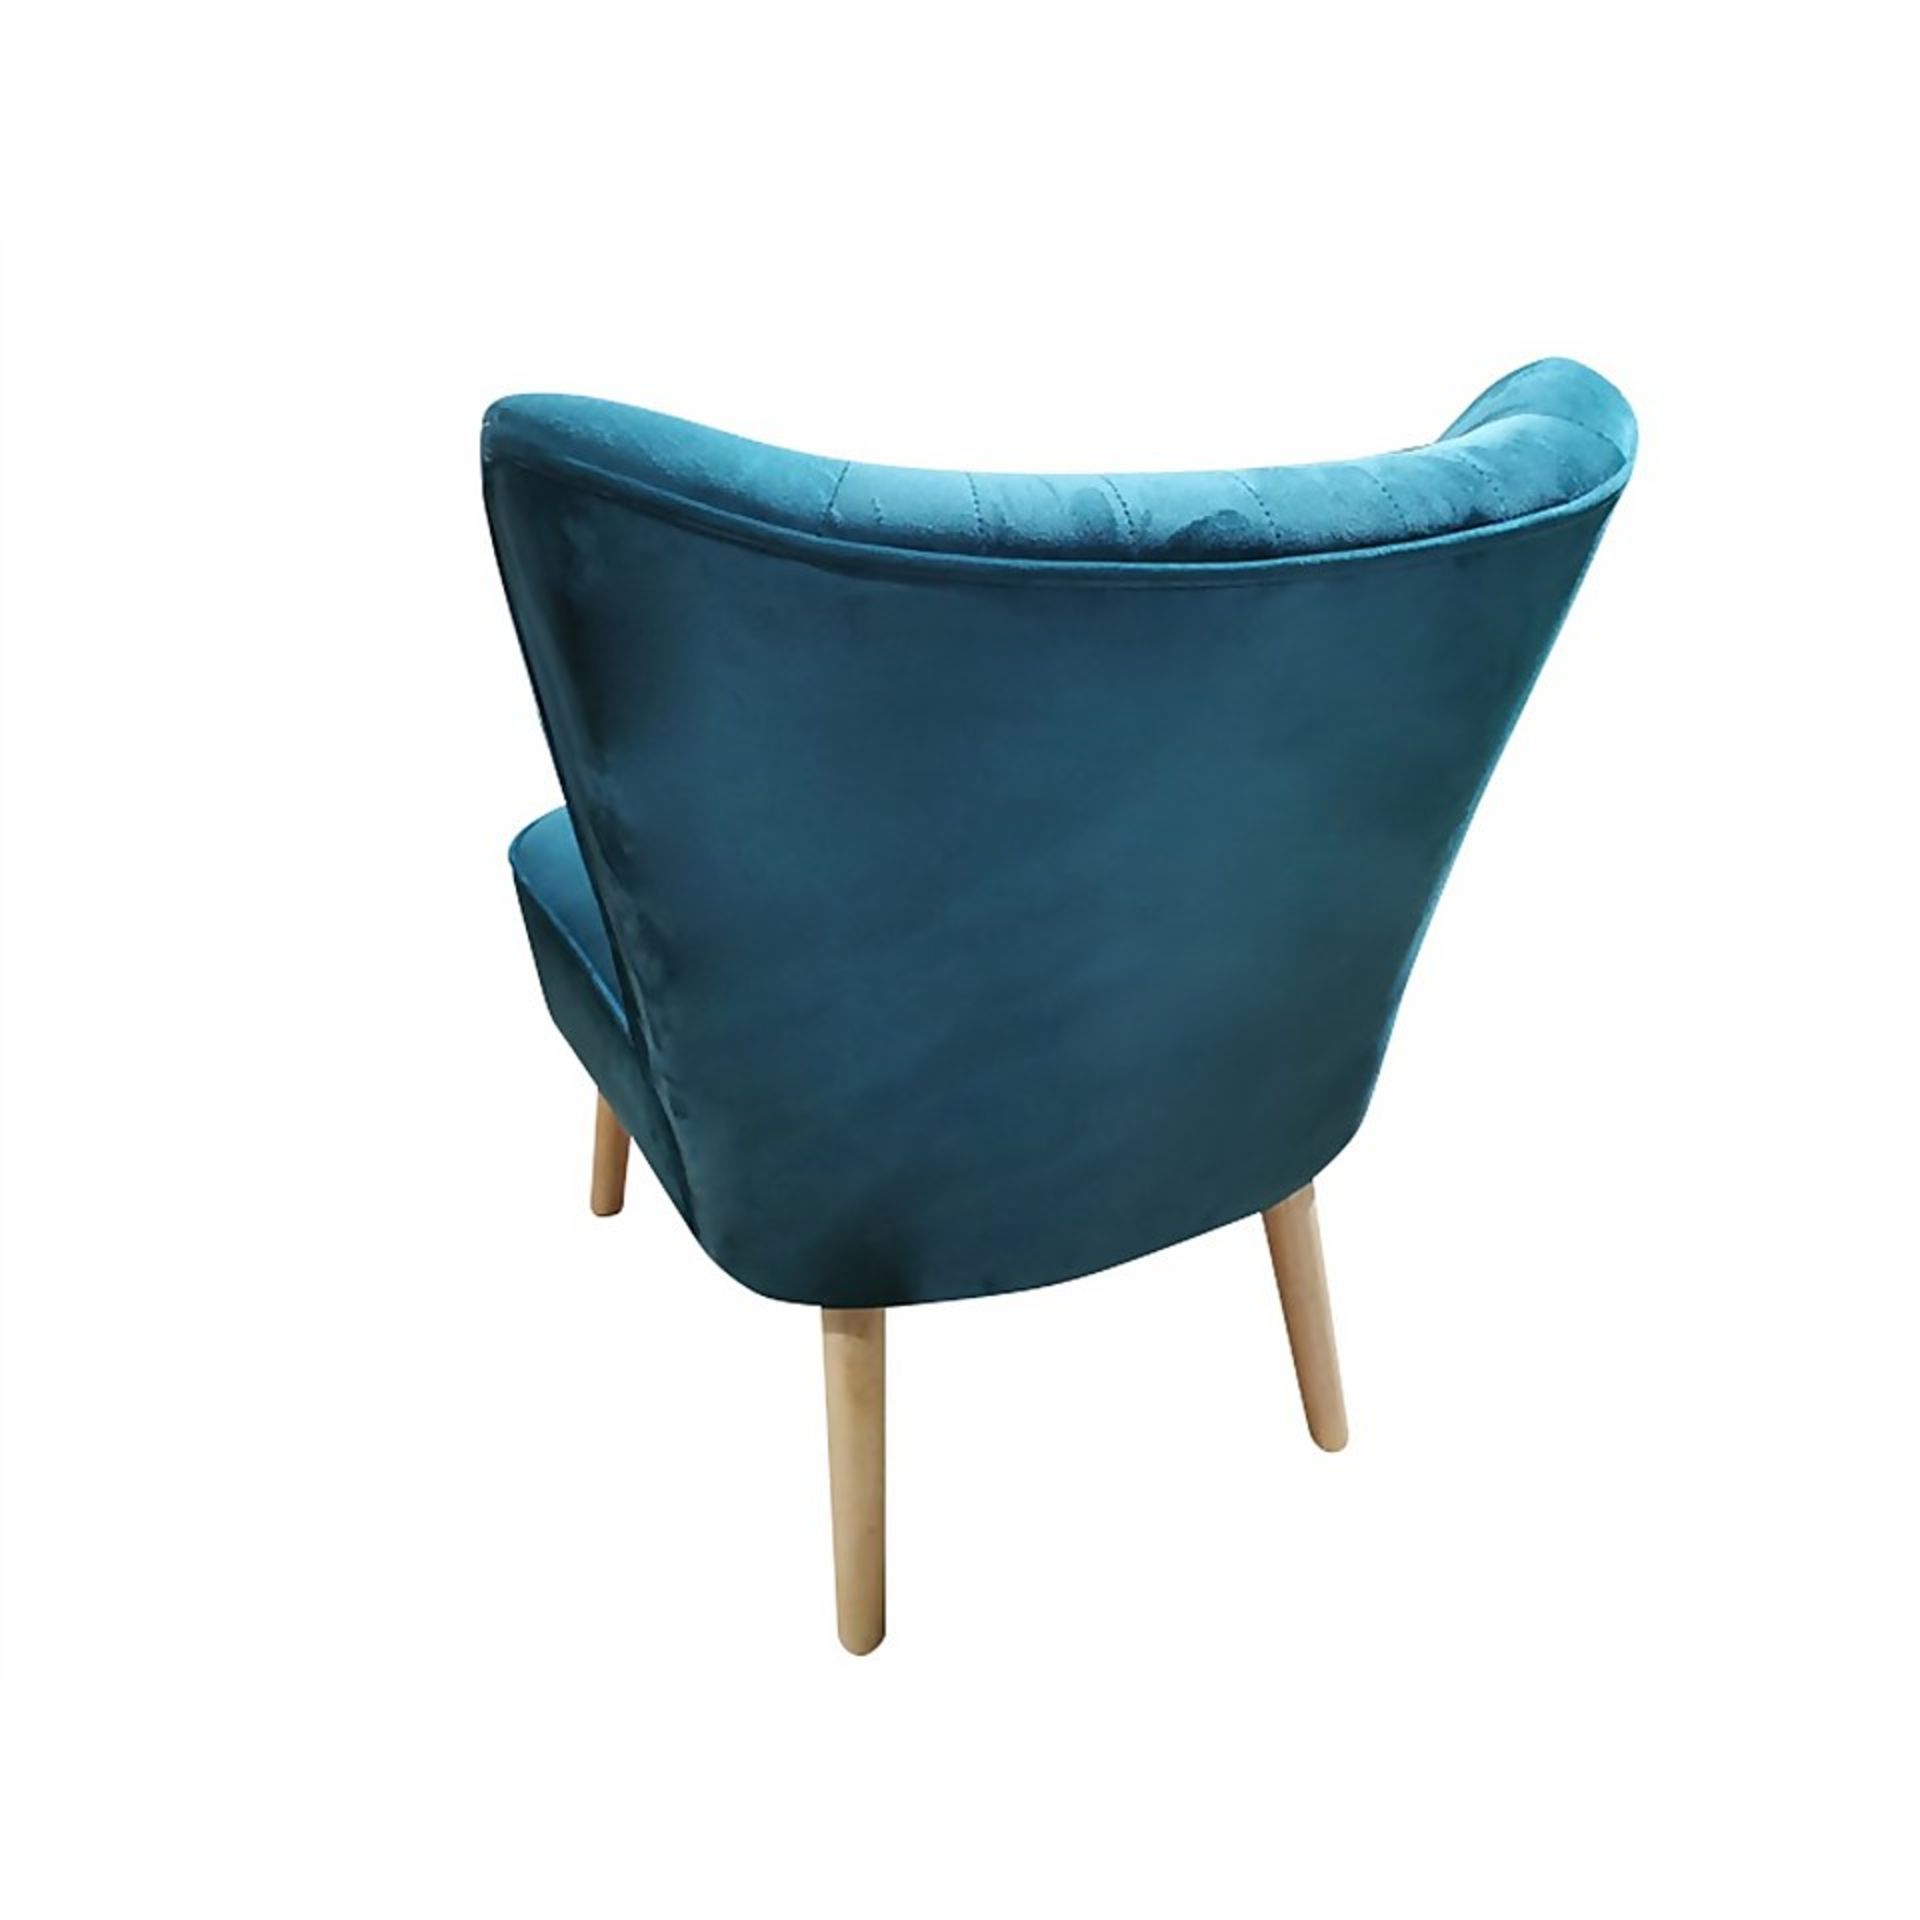 (R7L) 1 X Occasional Chair Teal. Velvet Fabric Cover. Rubberwood Legs. (H72xW60xD70cm) RRP £60 - Image 4 of 6